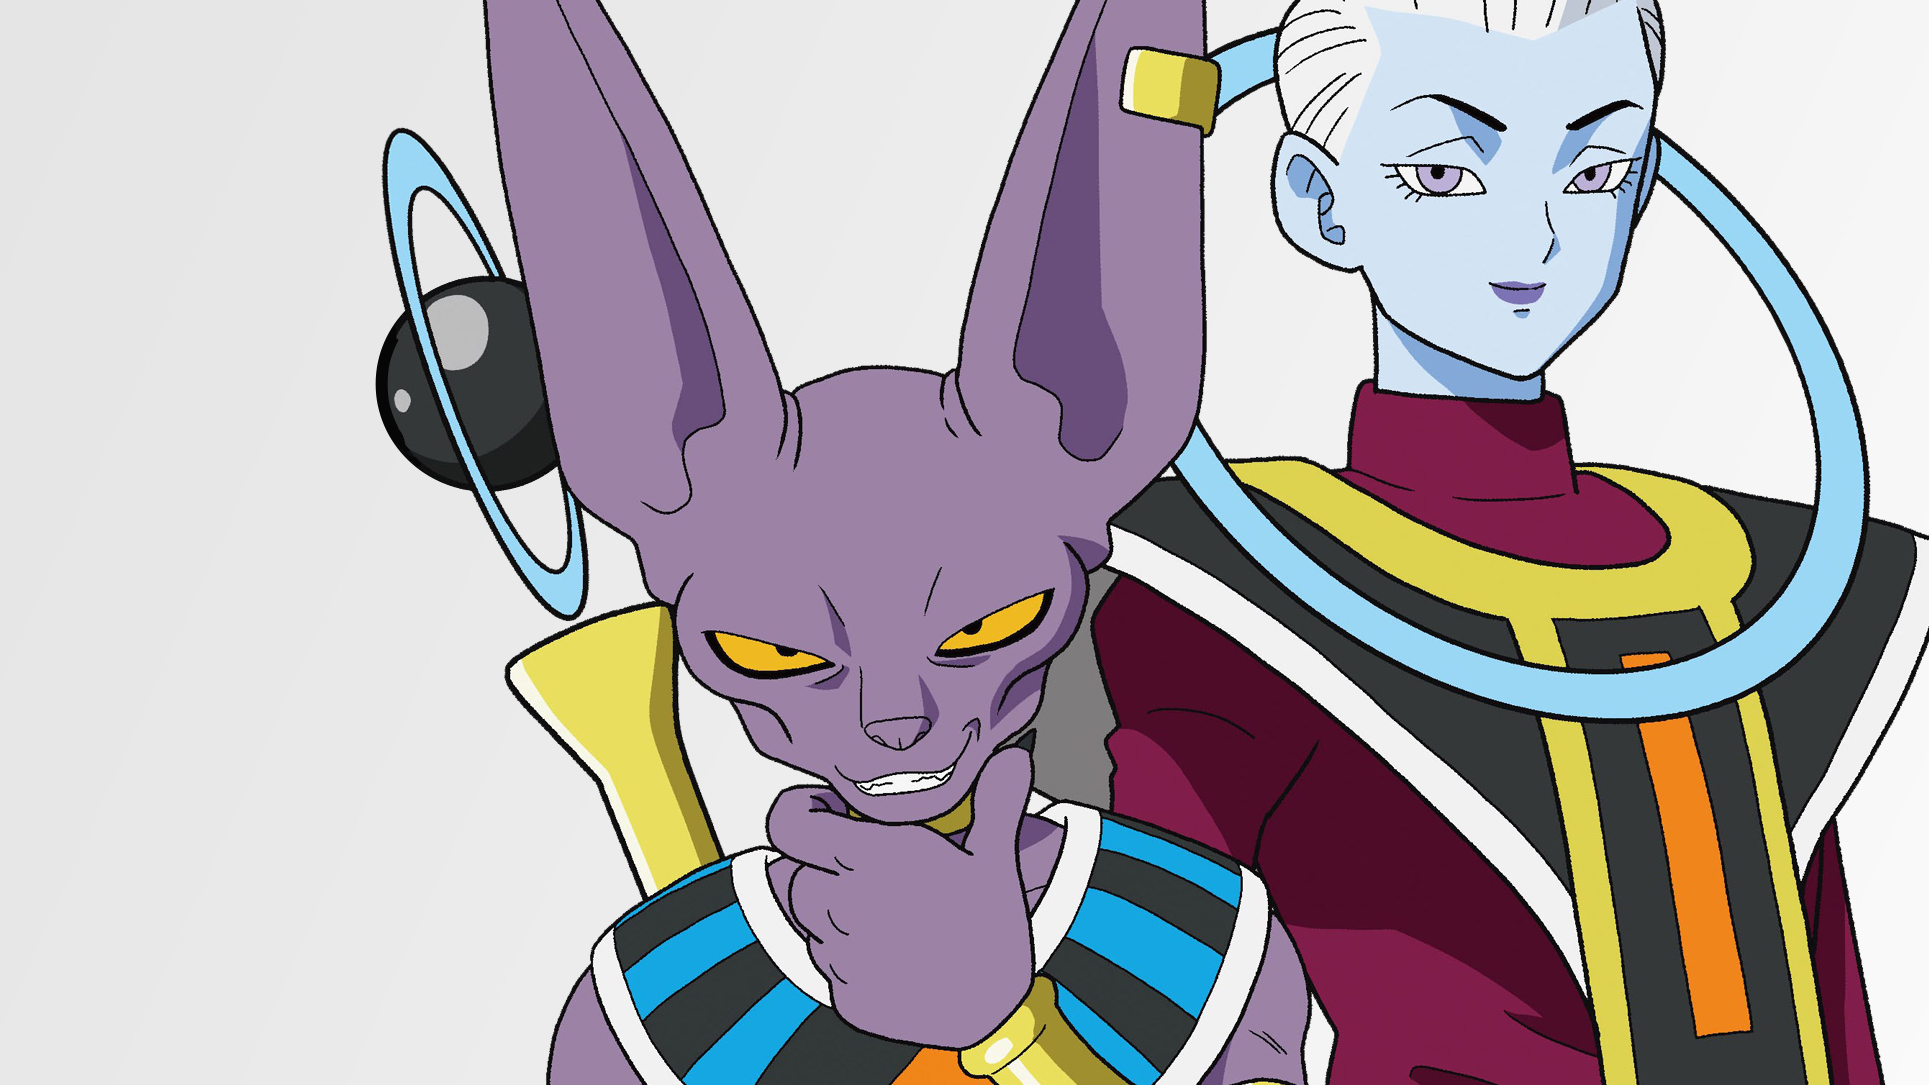 Dragon Ball Super Broly: Beerus and Whis Wallpapers | Cat ...